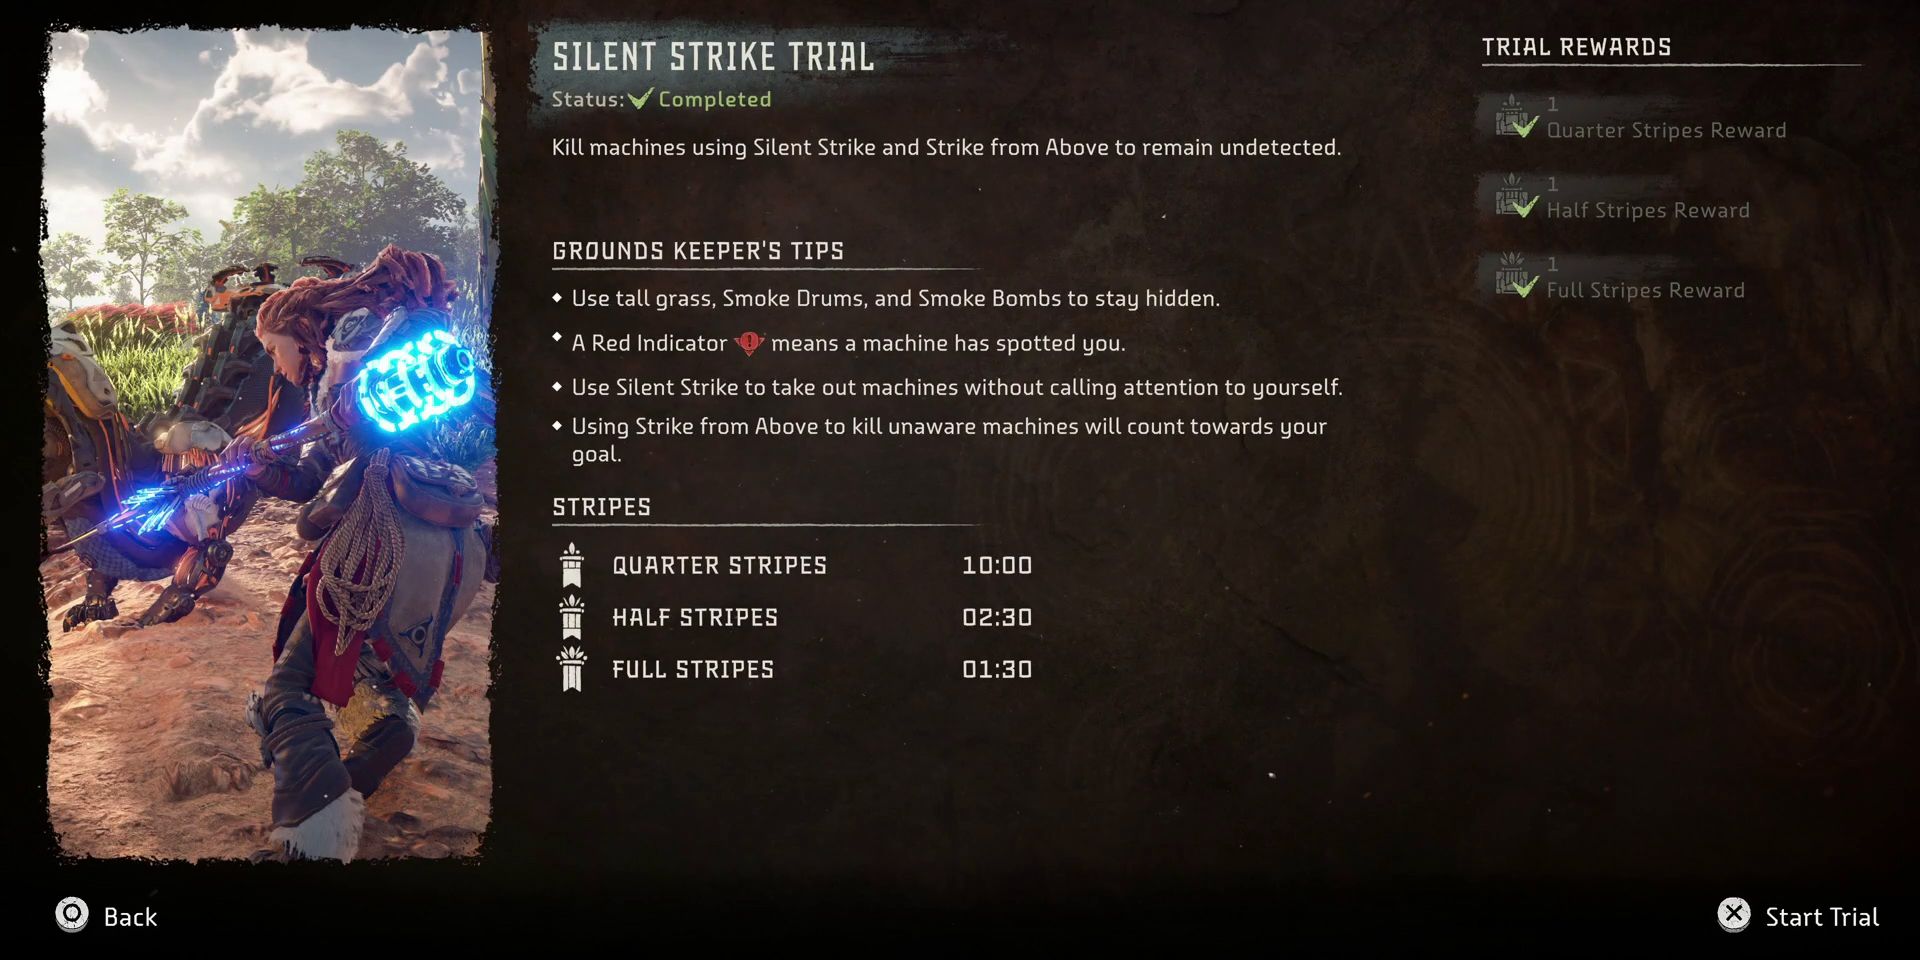 horizon-forbidden-west-plainsong-hunting-grounds-guide-03-silent-strike-trial-info